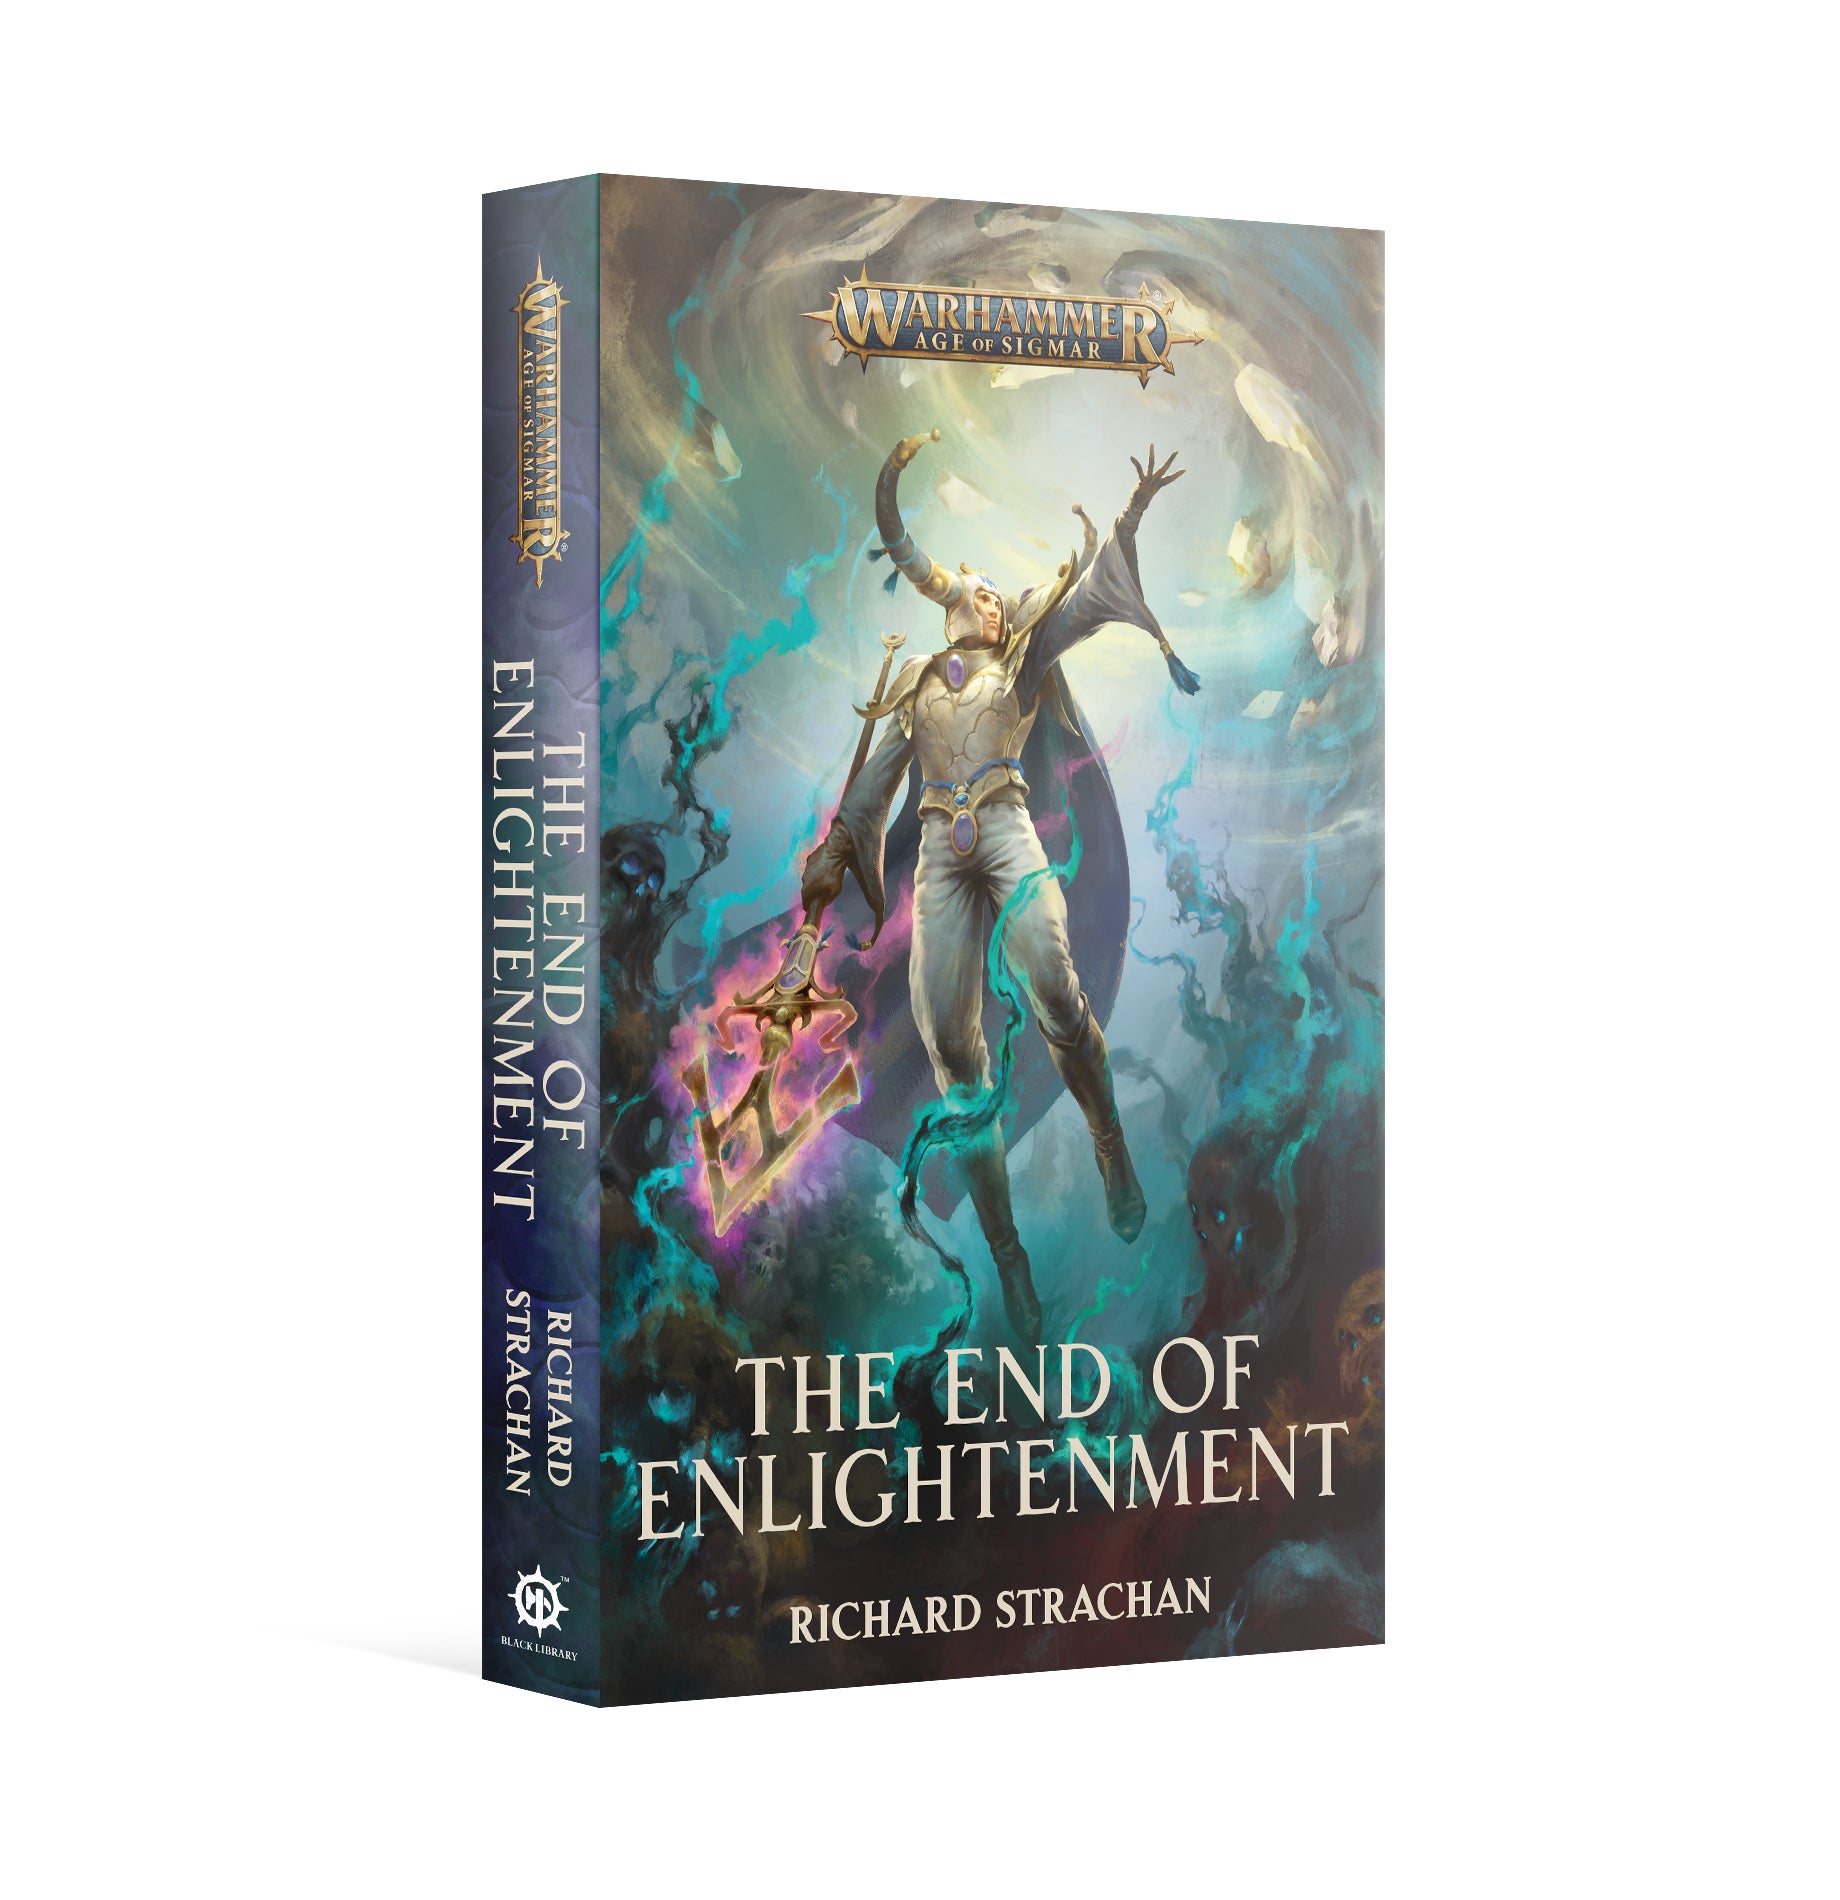 Age of Sigmar: The End of Enlightenment (PB)